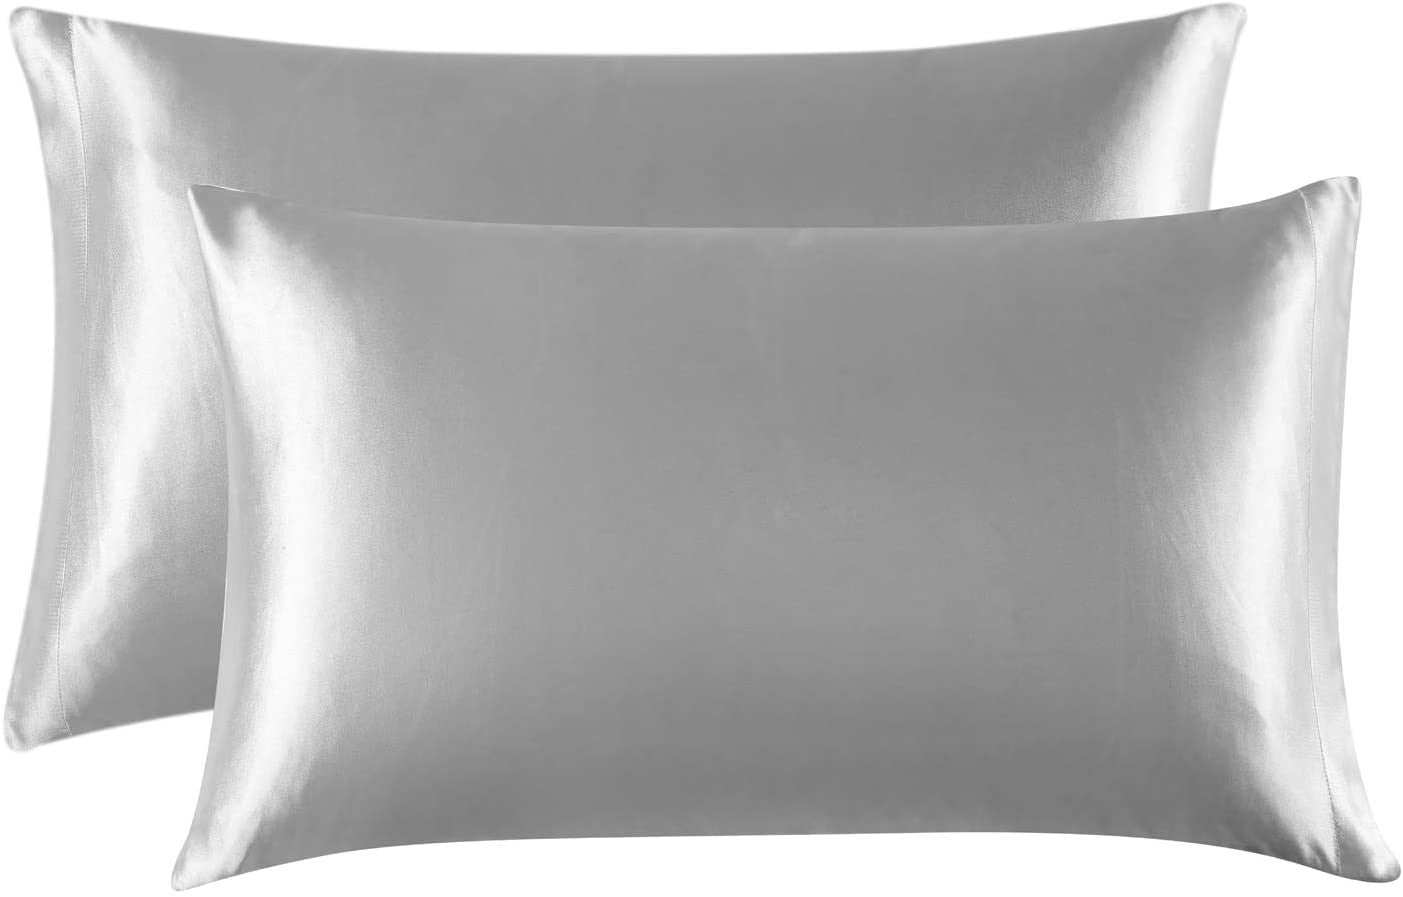 14 x 20 Inches FLXXIE 2 Pack Satin Toddler Pillowcases Silver Grey Luxury Travel Pillow Cases with Envelope Closure for Kids 